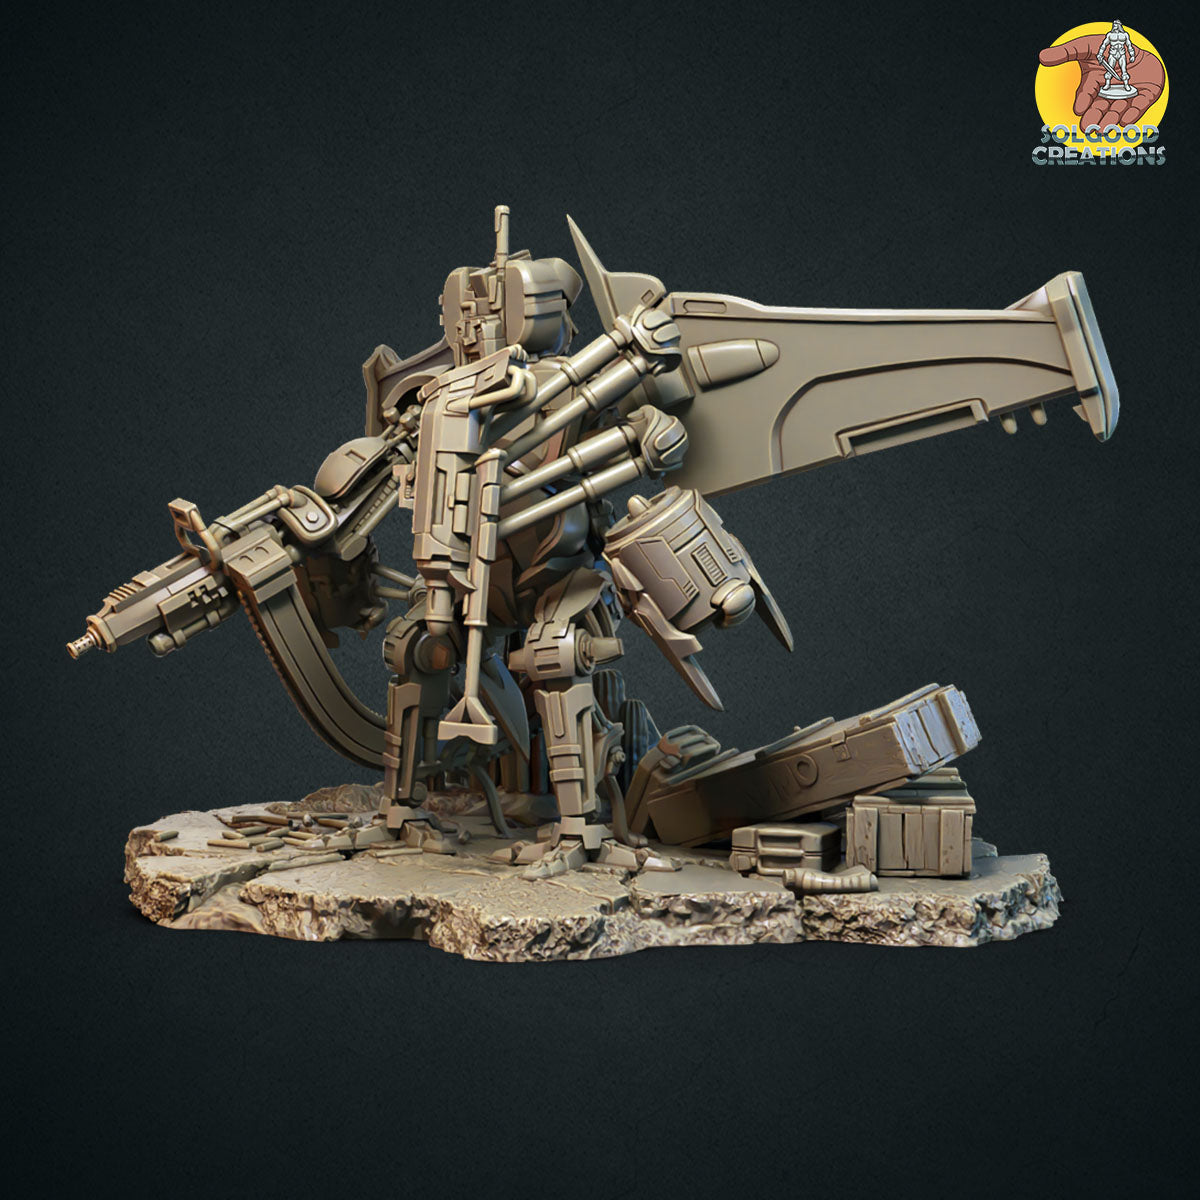 
                  
                    Miniatures - Solgood Creations - Thunderscream the Jet Cyborg - For Wargames and Tabletop Games,  Collectors, and Painters
                  
                